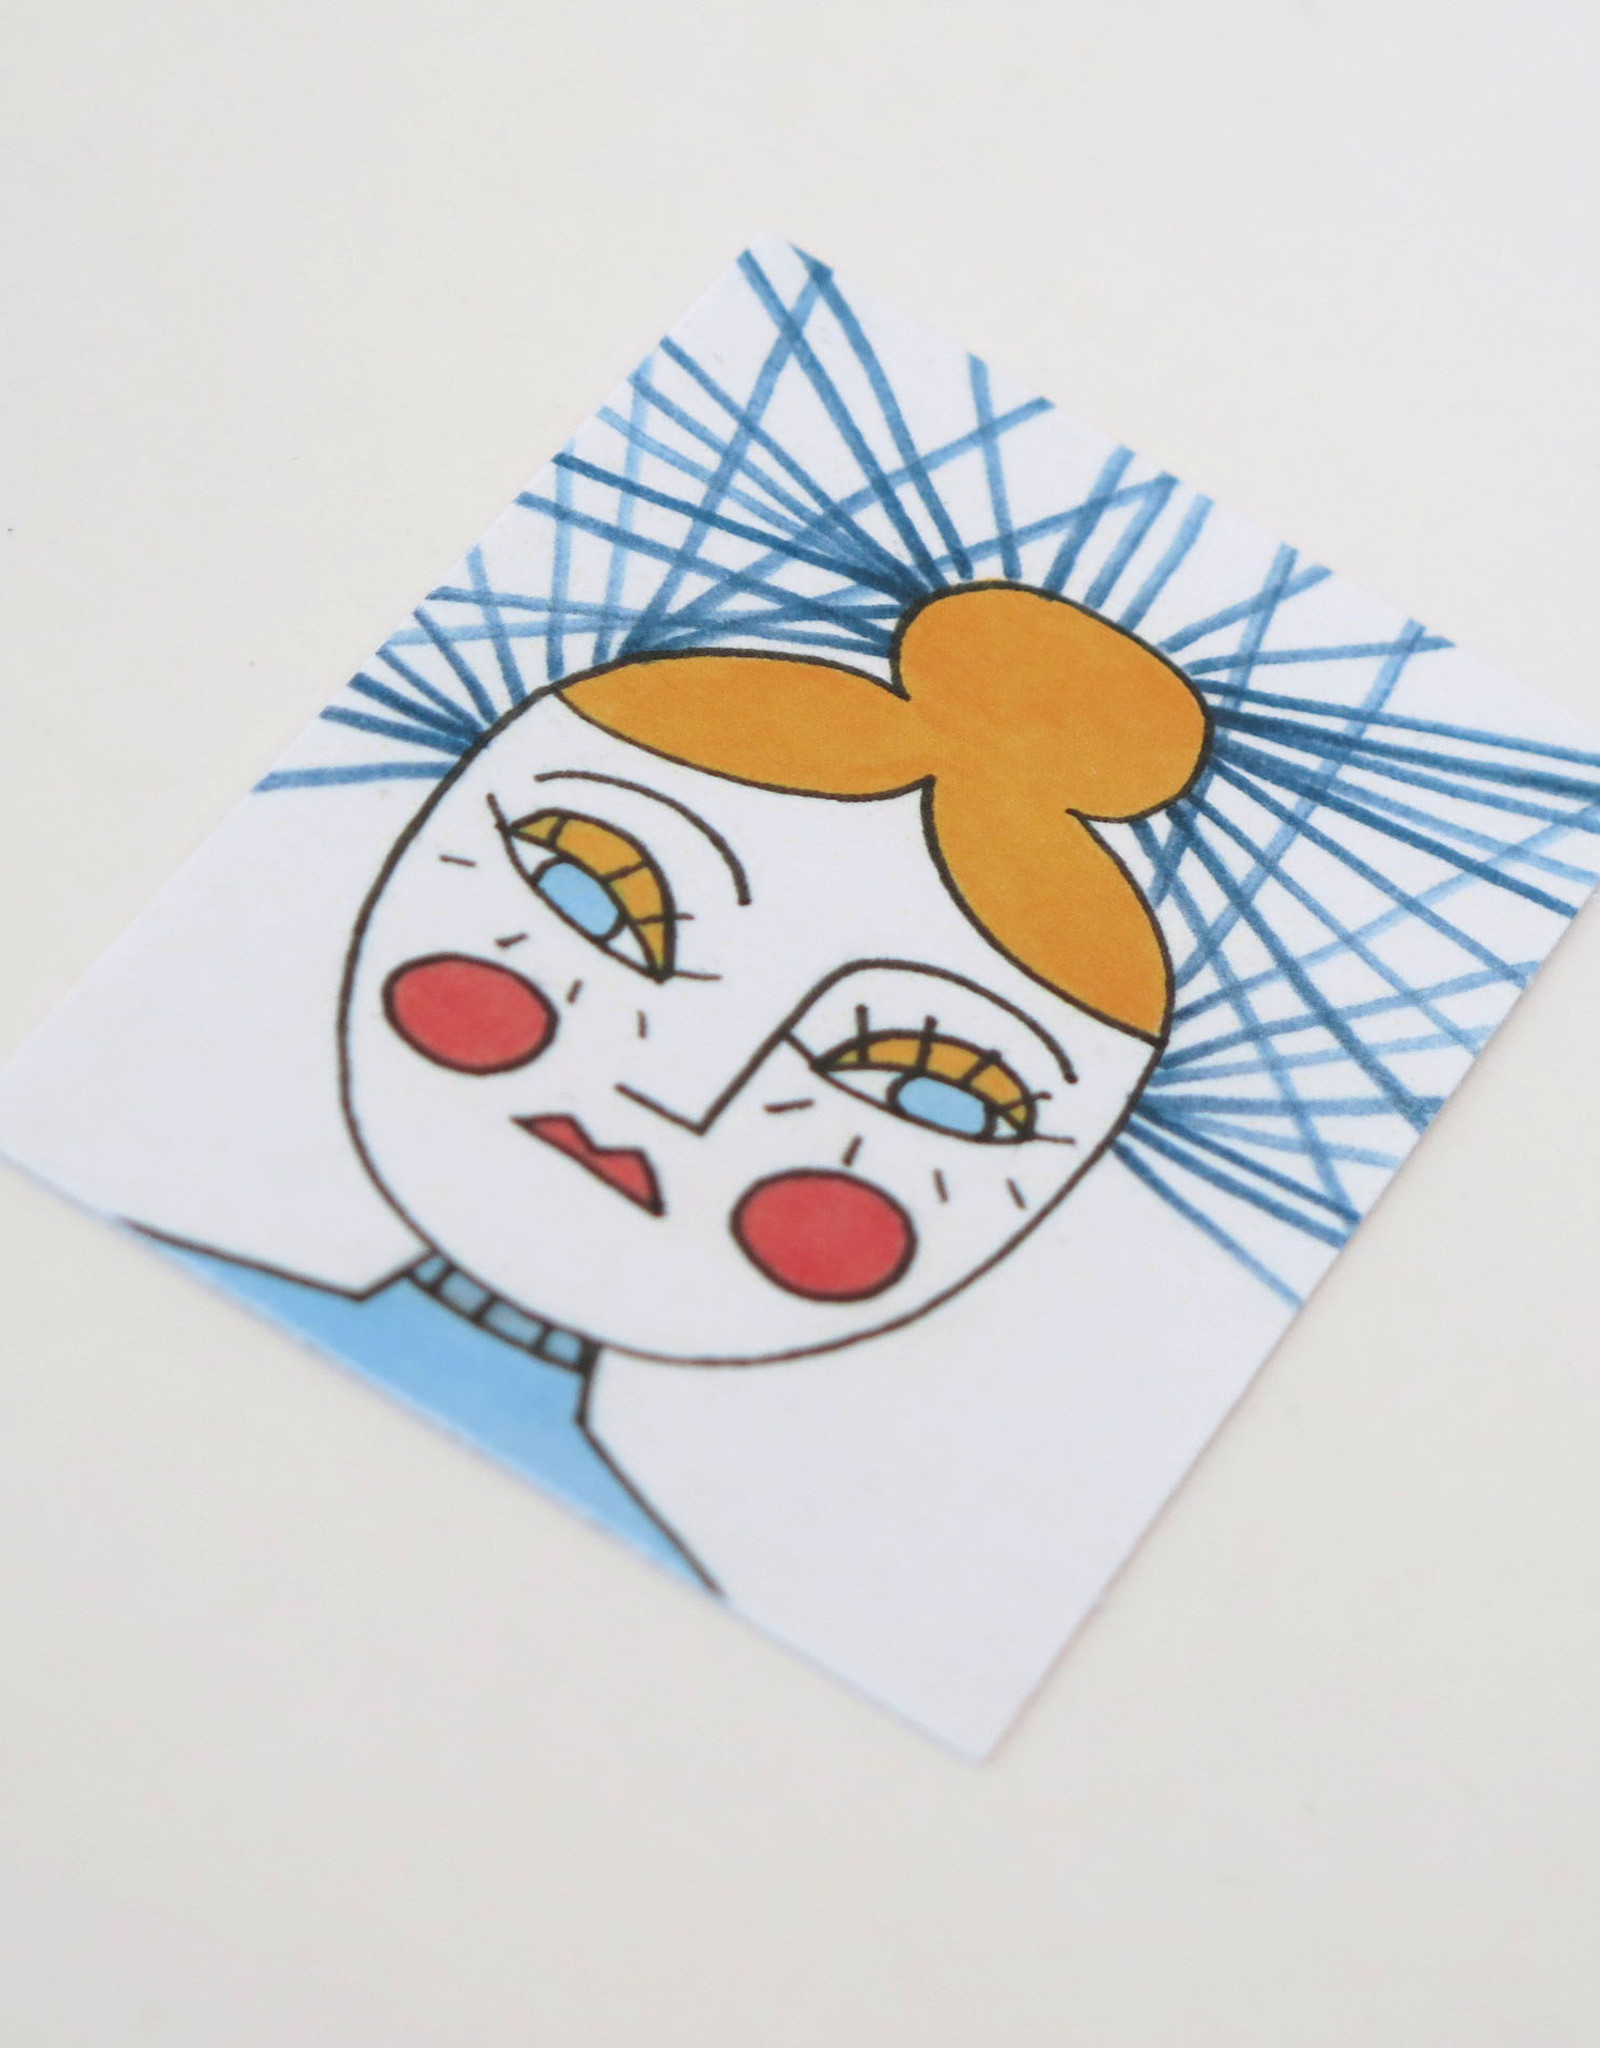 "Girl with  bun" Small Art Card by evesoup studio